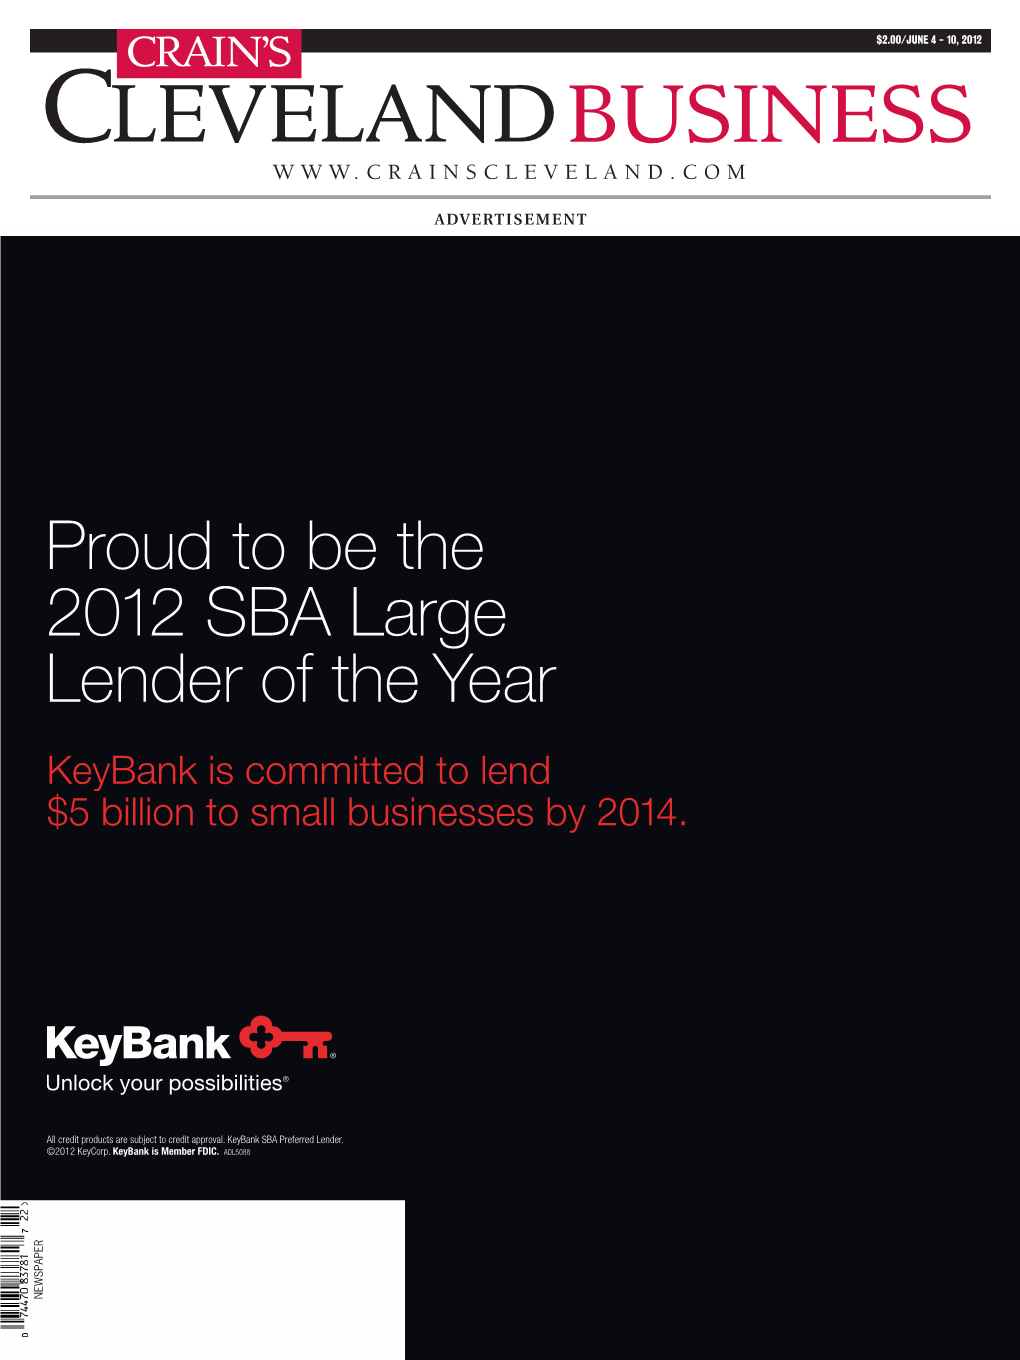 Proud to Be the 2012 SBA Large Lender of the Year Keybank Is Committed to Lend $5 Billion to Small Businesses by 2014